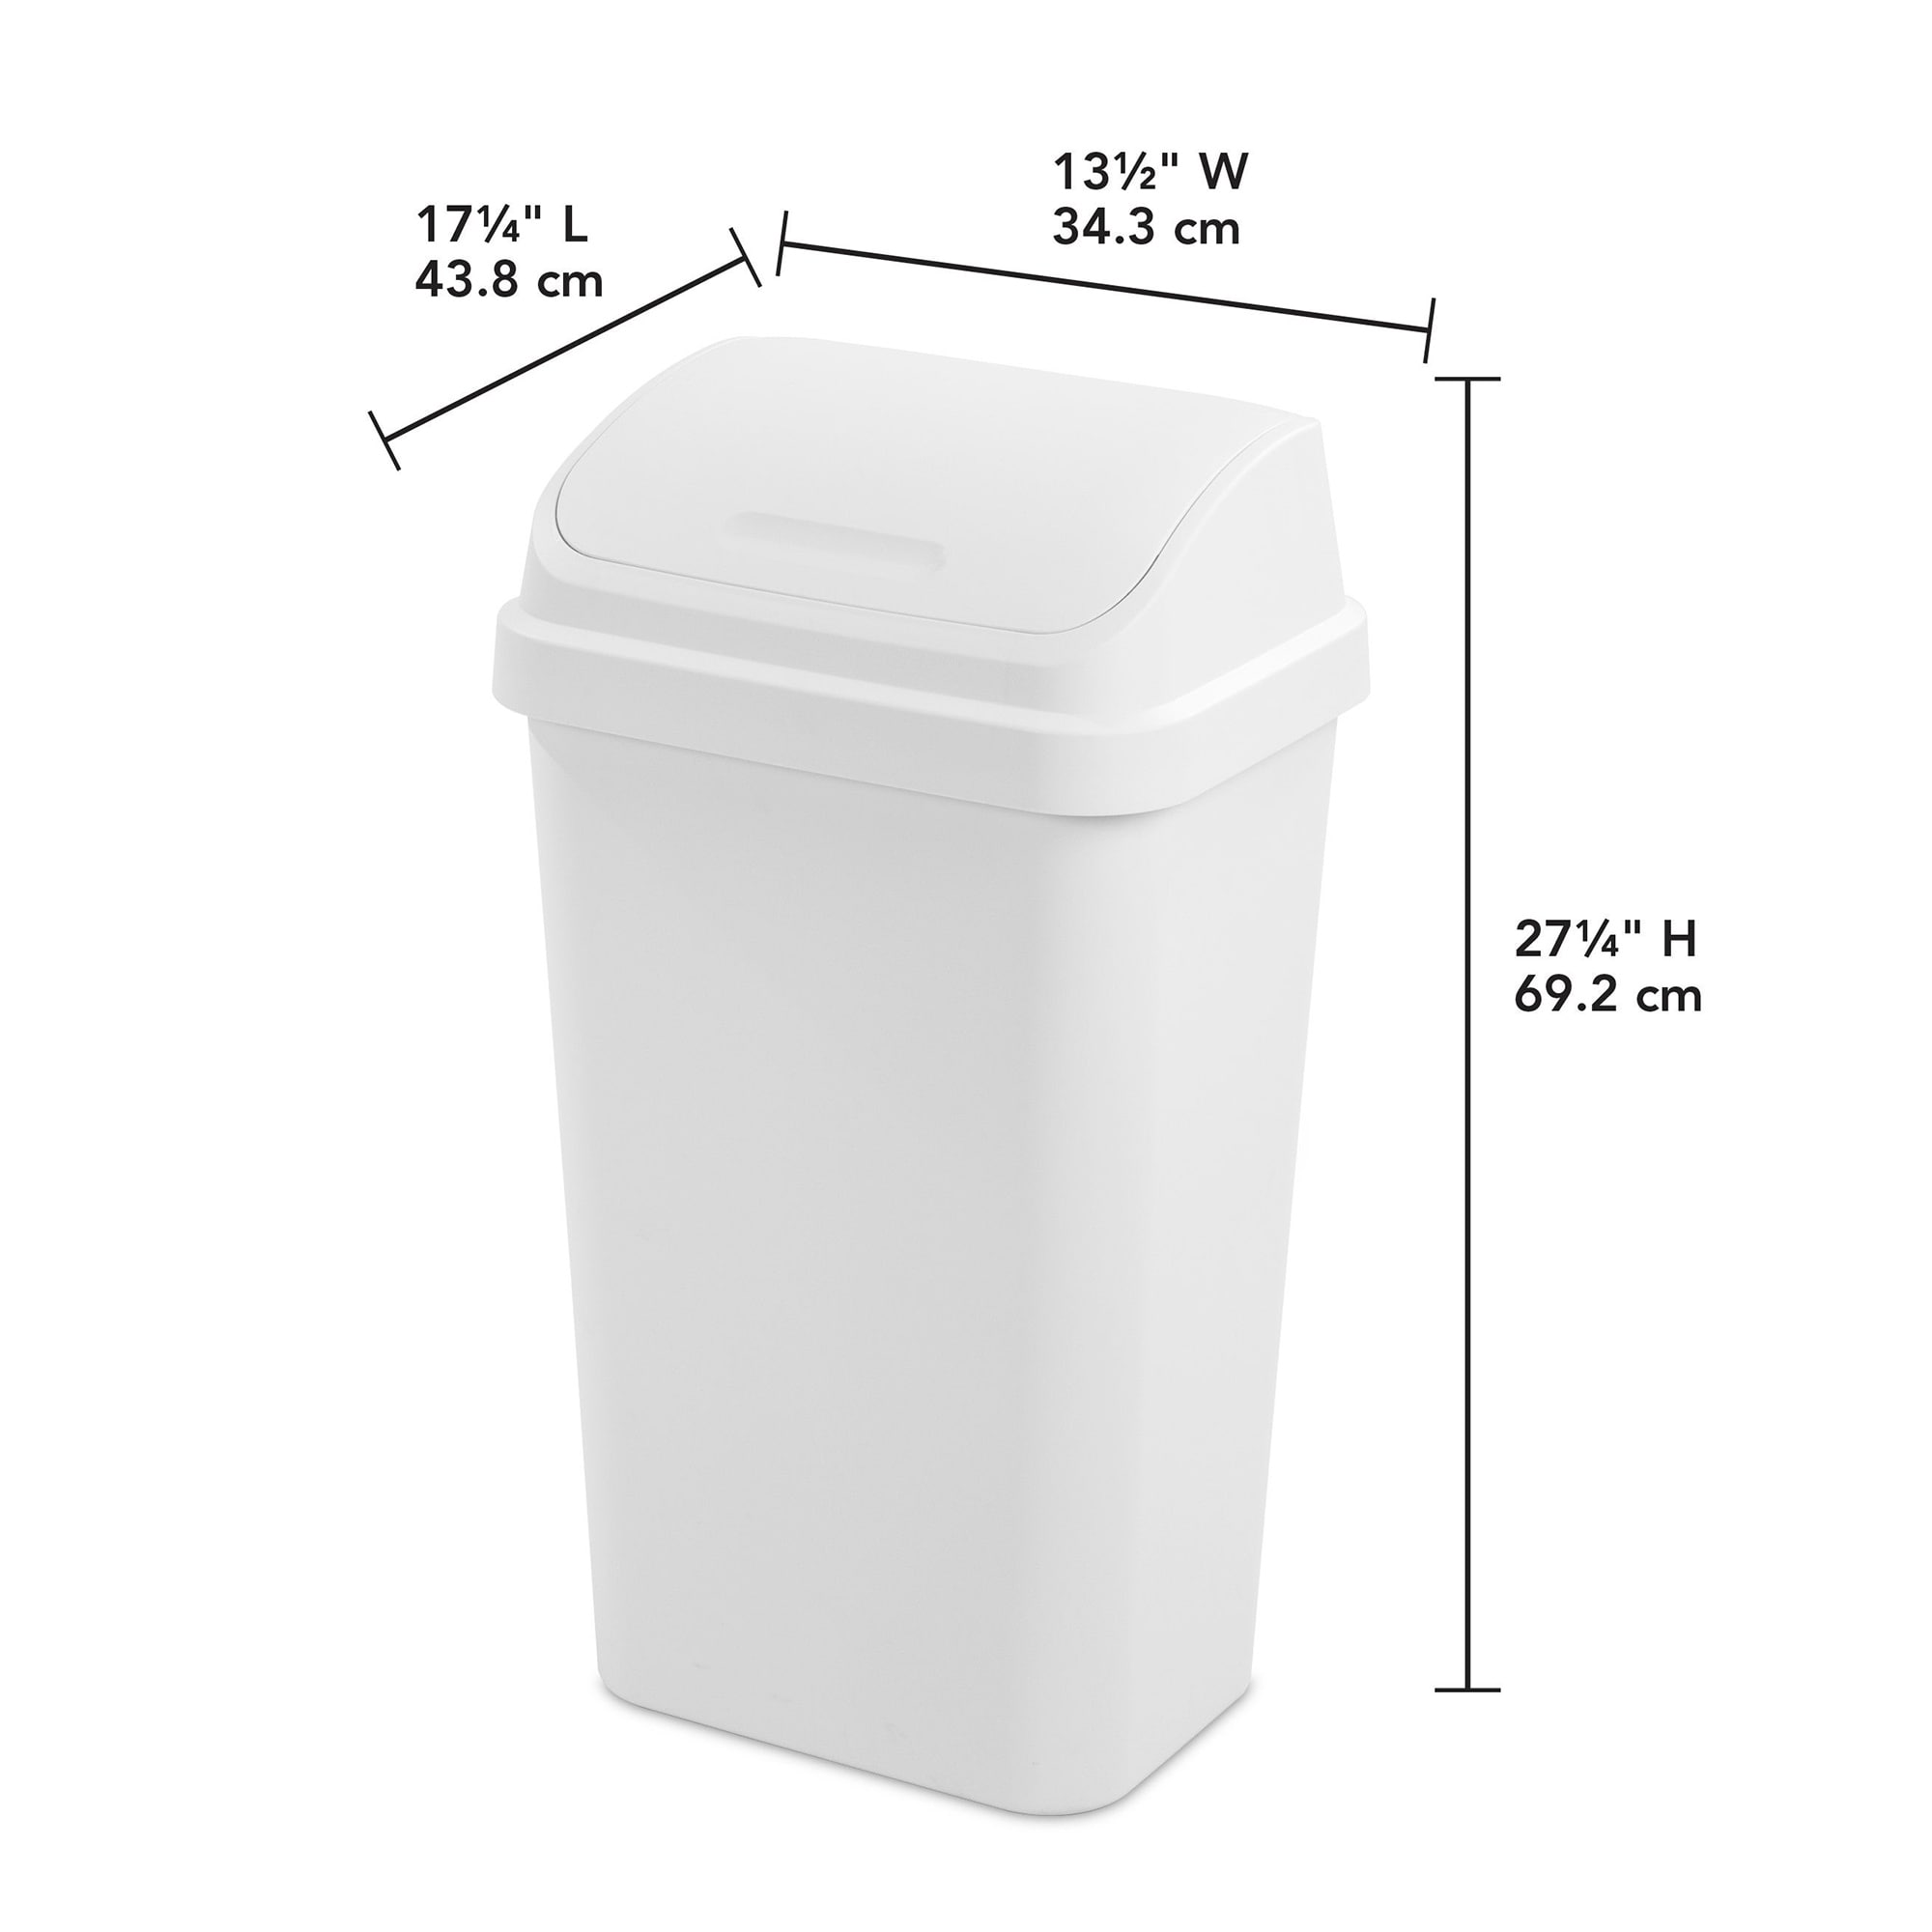 https://ak1.ostkcdn.com/images/products/is/images/direct/ea6693fd087368afe43a98a43b14df87d01a8336/Sterilite-13-Gal-Swing-Top-Lidded-Wastebasket-Kitchen-Trash-Can%2C-White-%284-Pack%29.jpg